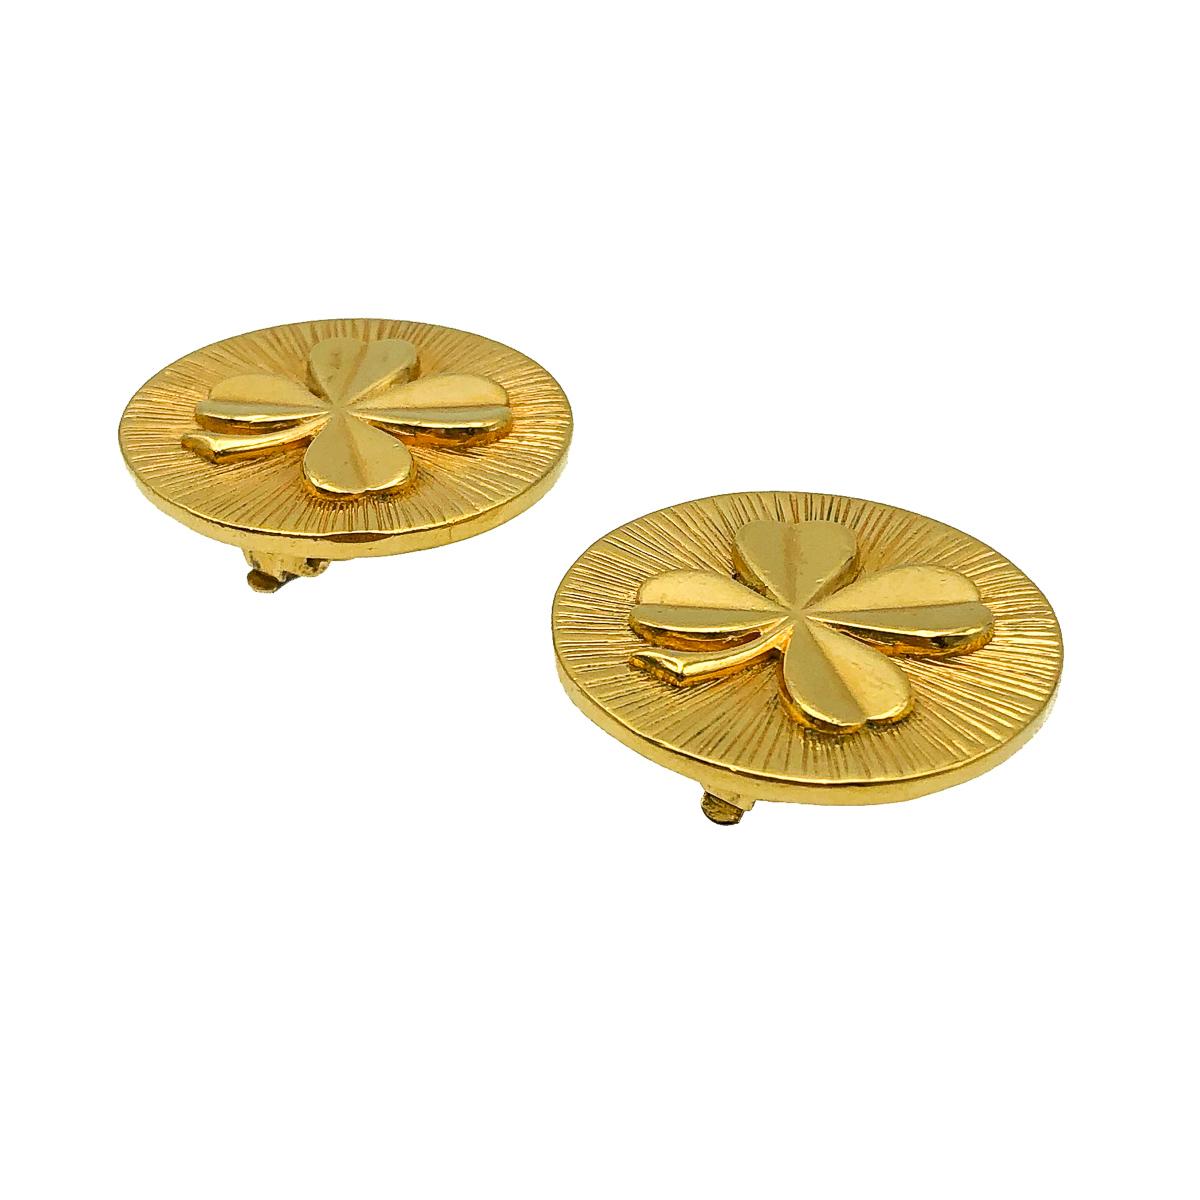 A magnificent, large disc style pair of Vintage Chanel Clover Earrings dating to the 1960s whilst Coco Chanel was at the helm of the House. Crafted in gold plated metal. Depicting exquisitely one of Gabrielle 'Coco' Chanel's lucky charms, the four